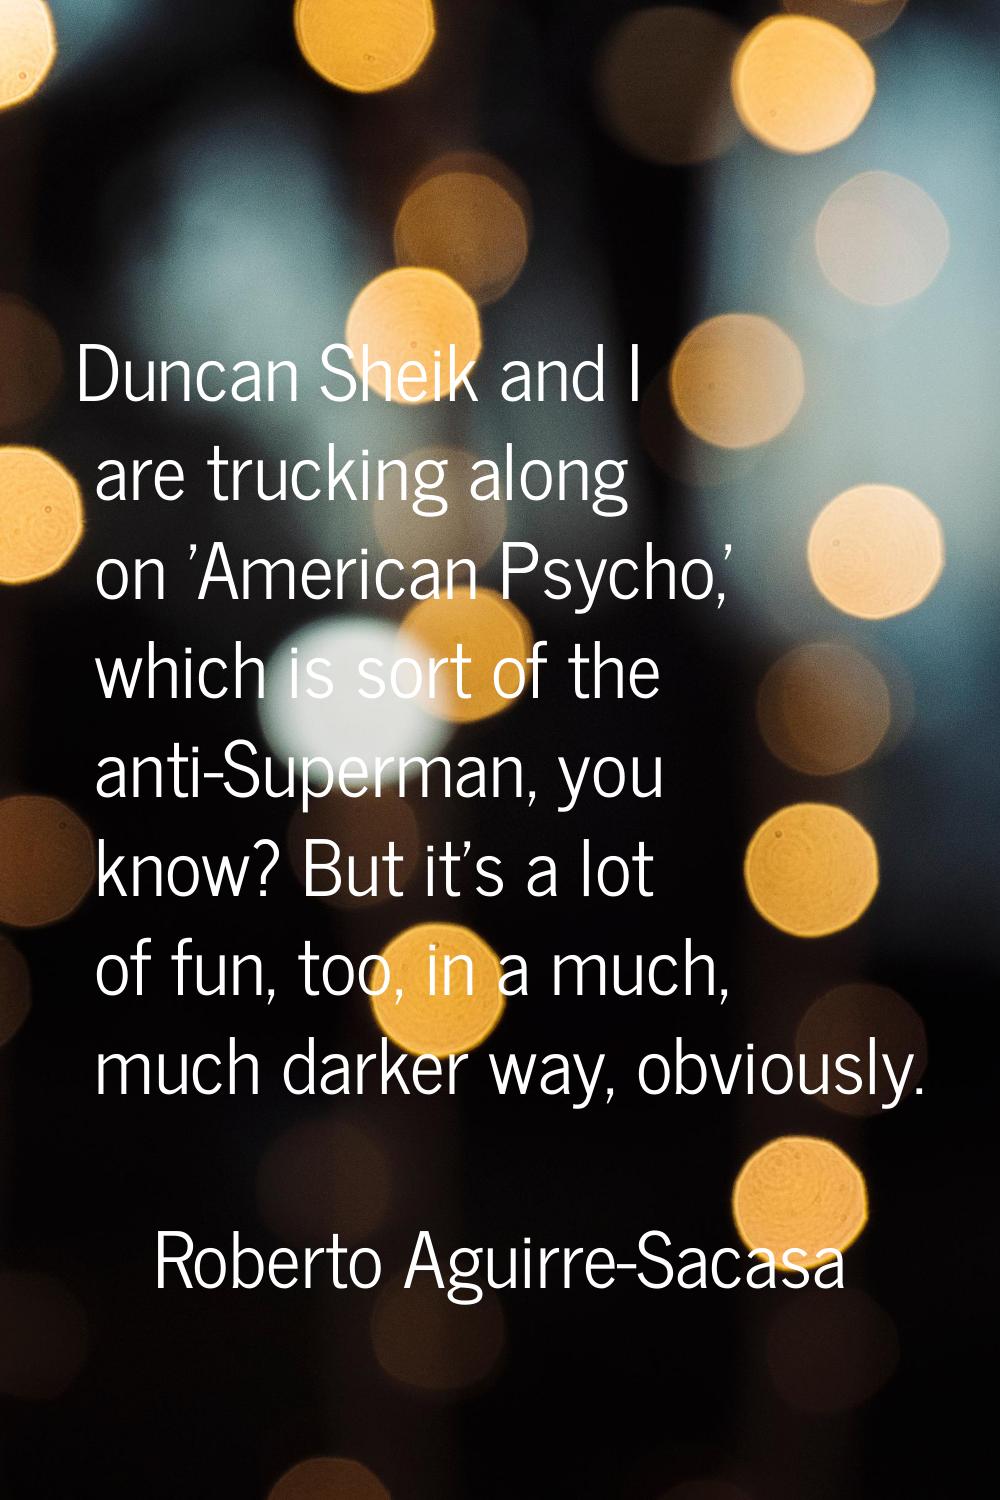 Duncan Sheik and I are trucking along on 'American Psycho,' which is sort of the anti-Superman, you